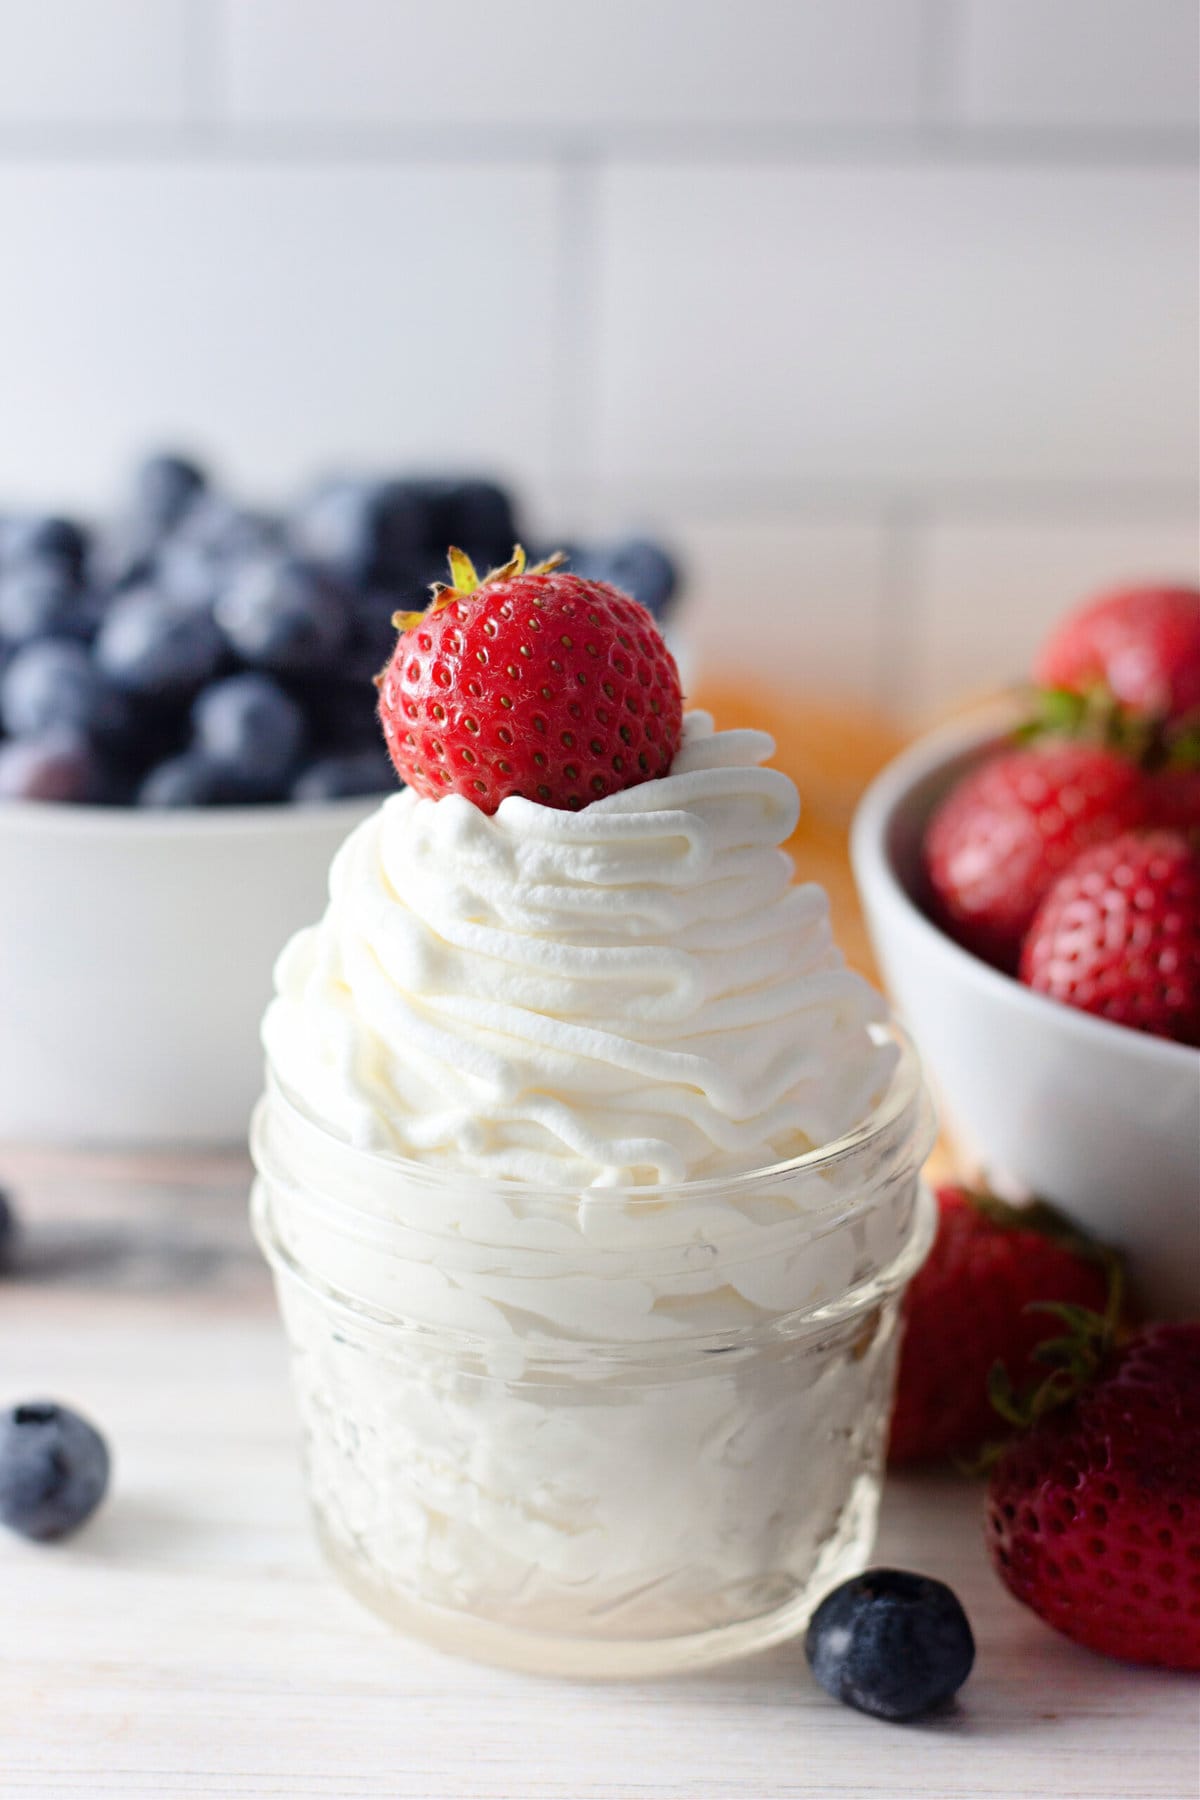 homemade whipped cream in a glass jar